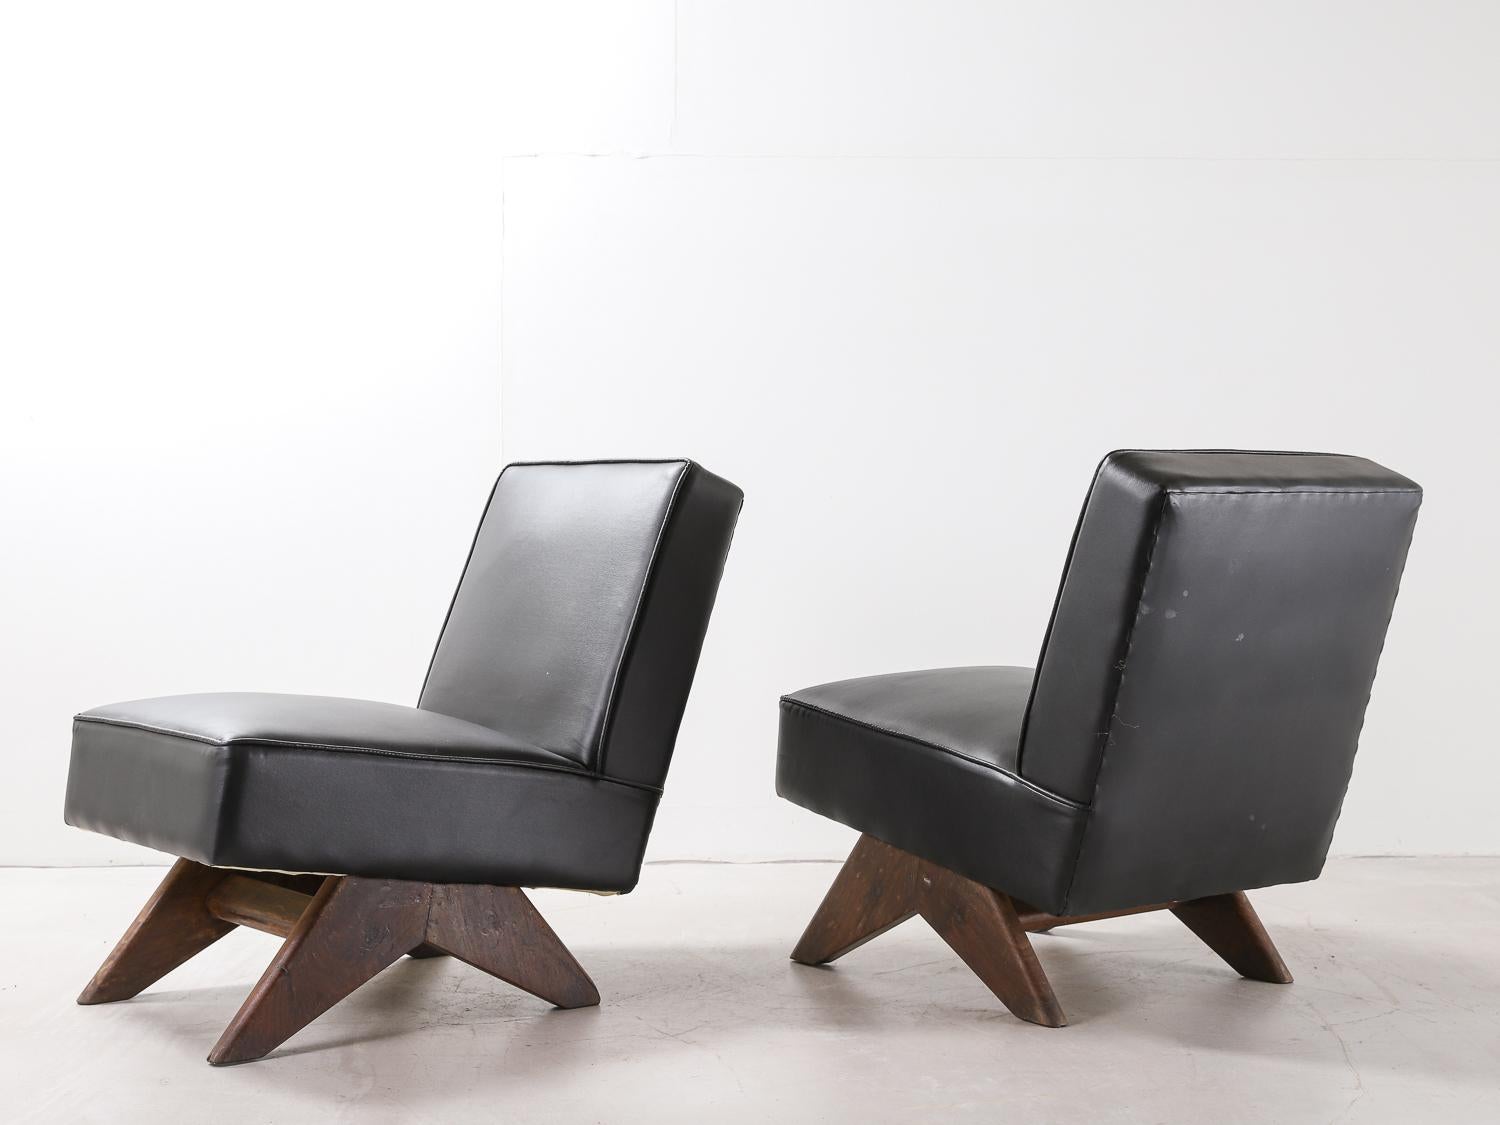 Pair of Pierre Jeanneret “Fireside” chair, circa 1955-1956. Teak and faux leather. Intended for; High court and University of Punjab, Chandigarh, India

Photos include chairs in original condition before being restored.